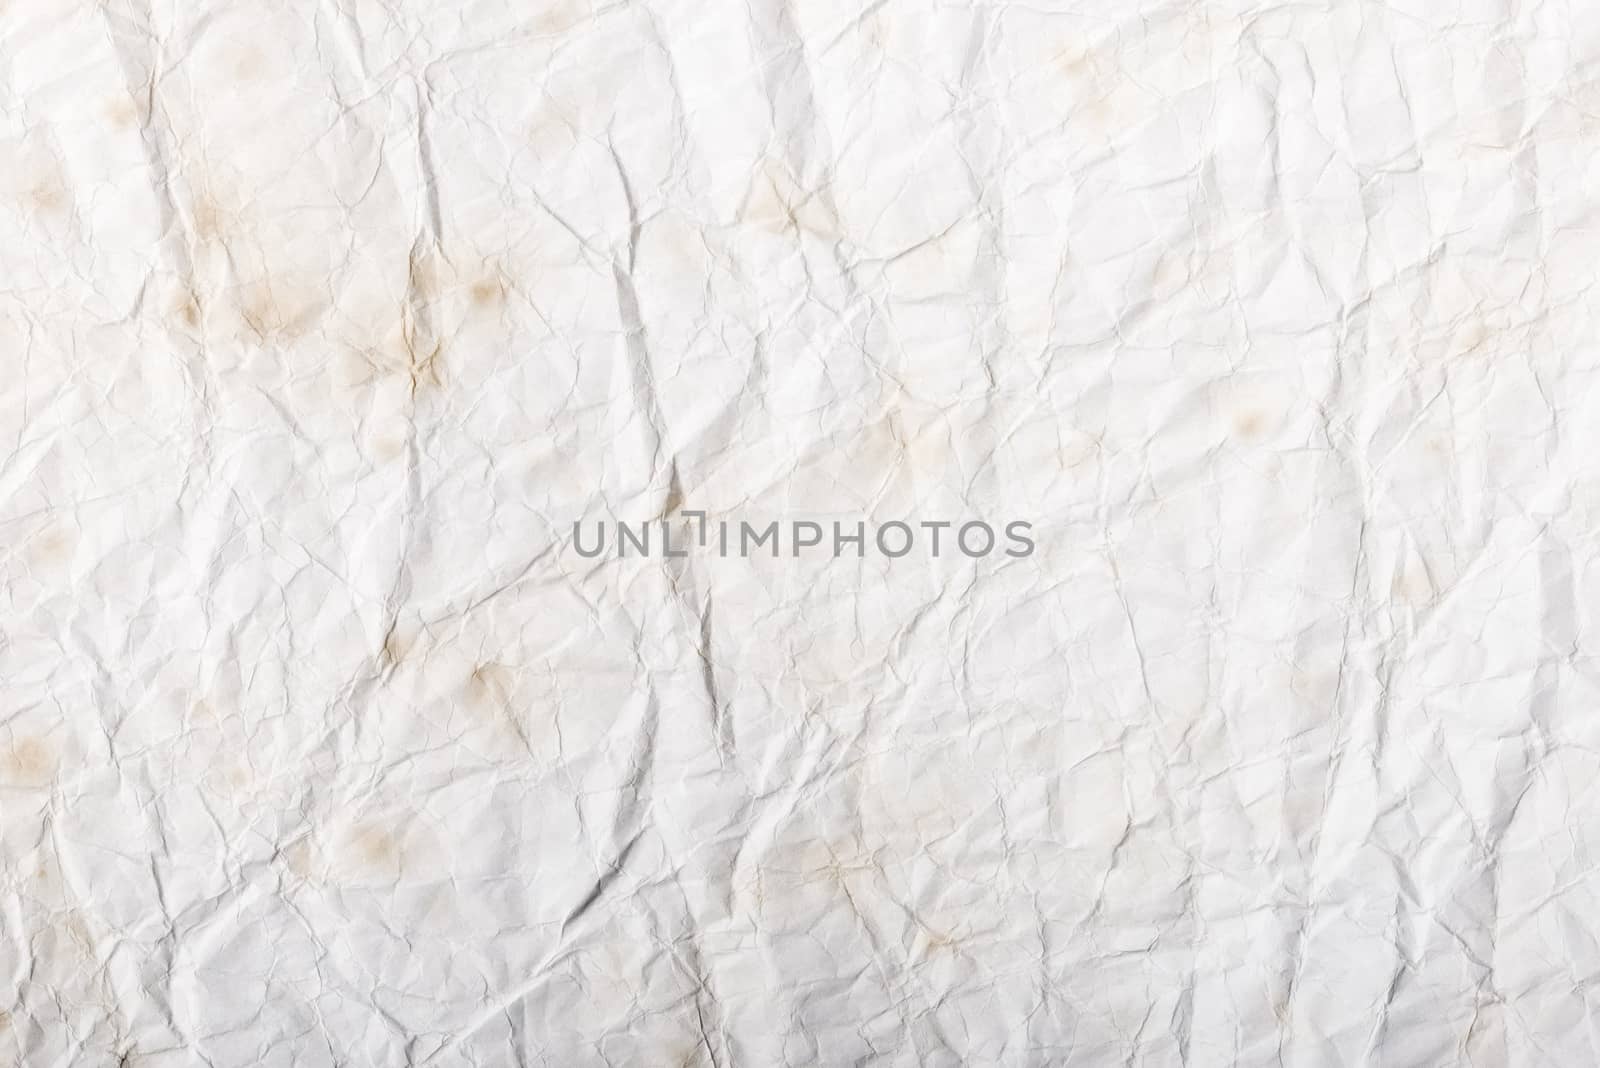 A crumpled white paper texture for background use